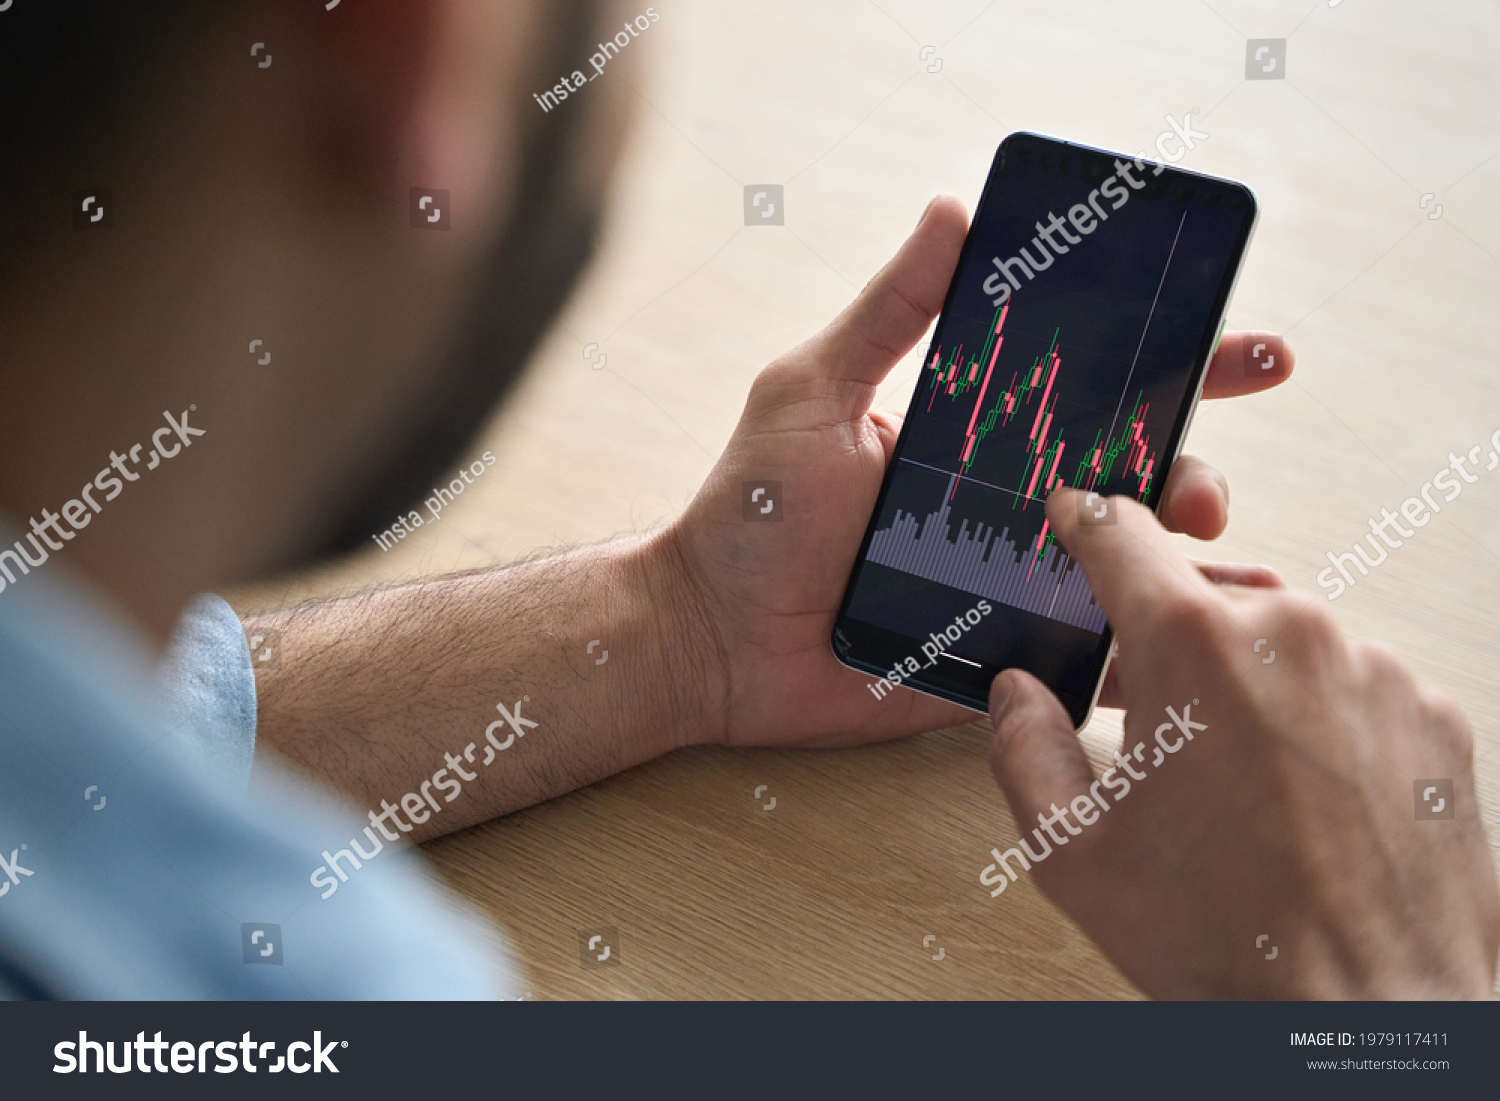 Over shoulder close up view of male analyst broker's hands holding touch screen device smartphone using tech ecommerce application of finance stock markets with graphs and numbers. #1979117411